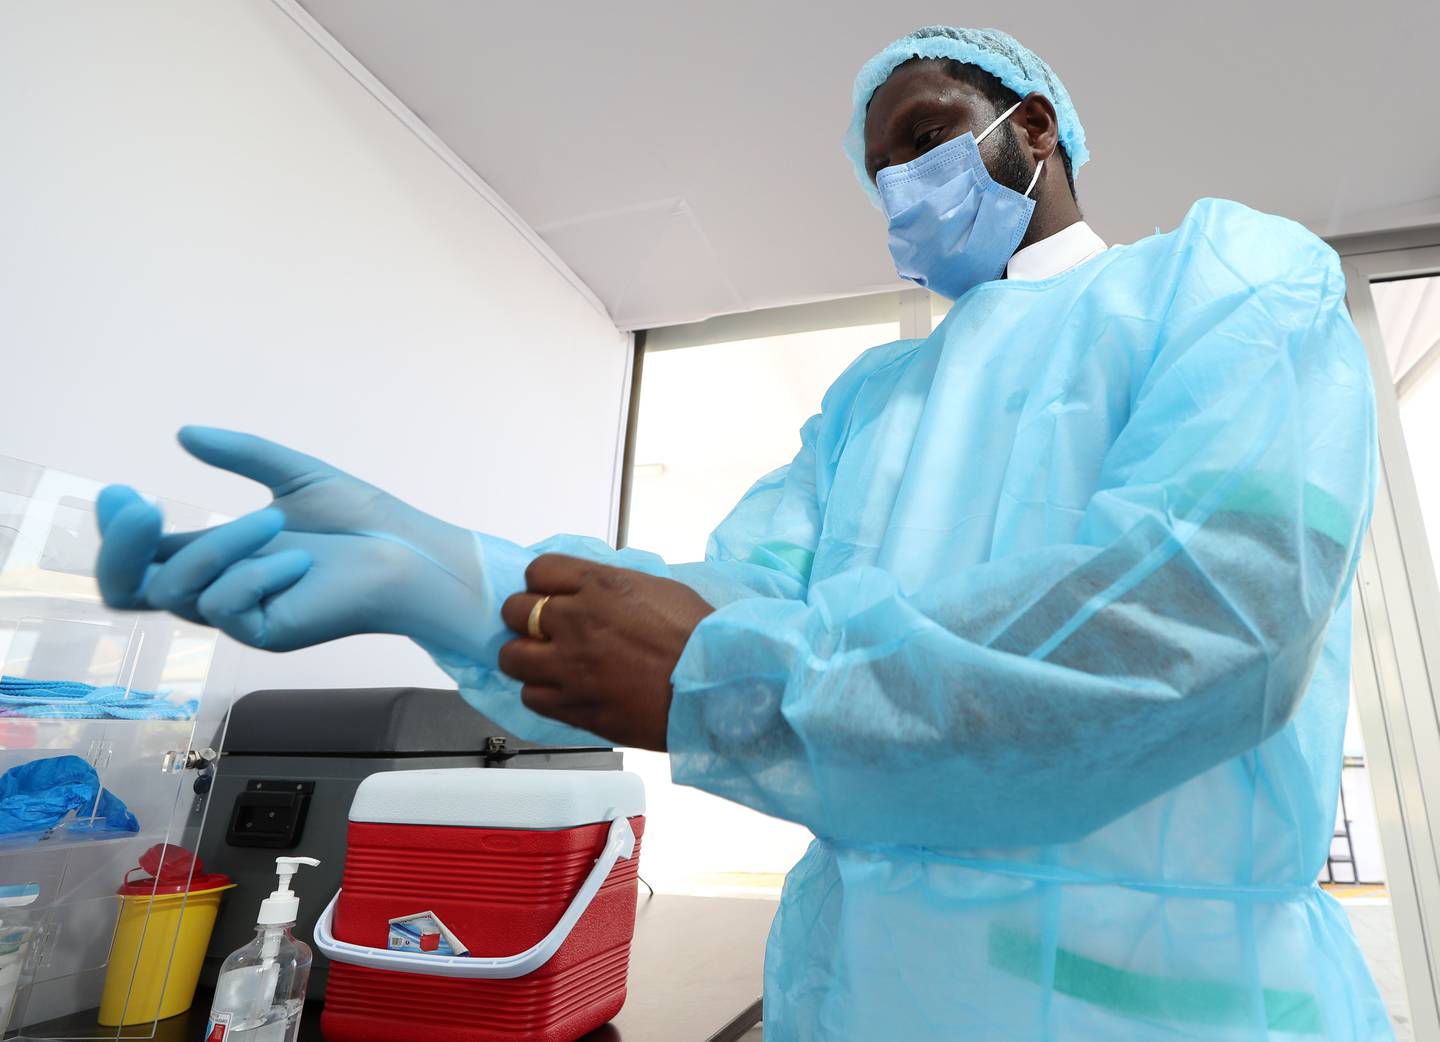 The UAE's public and private medical sectors were well equipped to handle the coronavirus pandemic after years of investment. Chris Whiteoak / The National